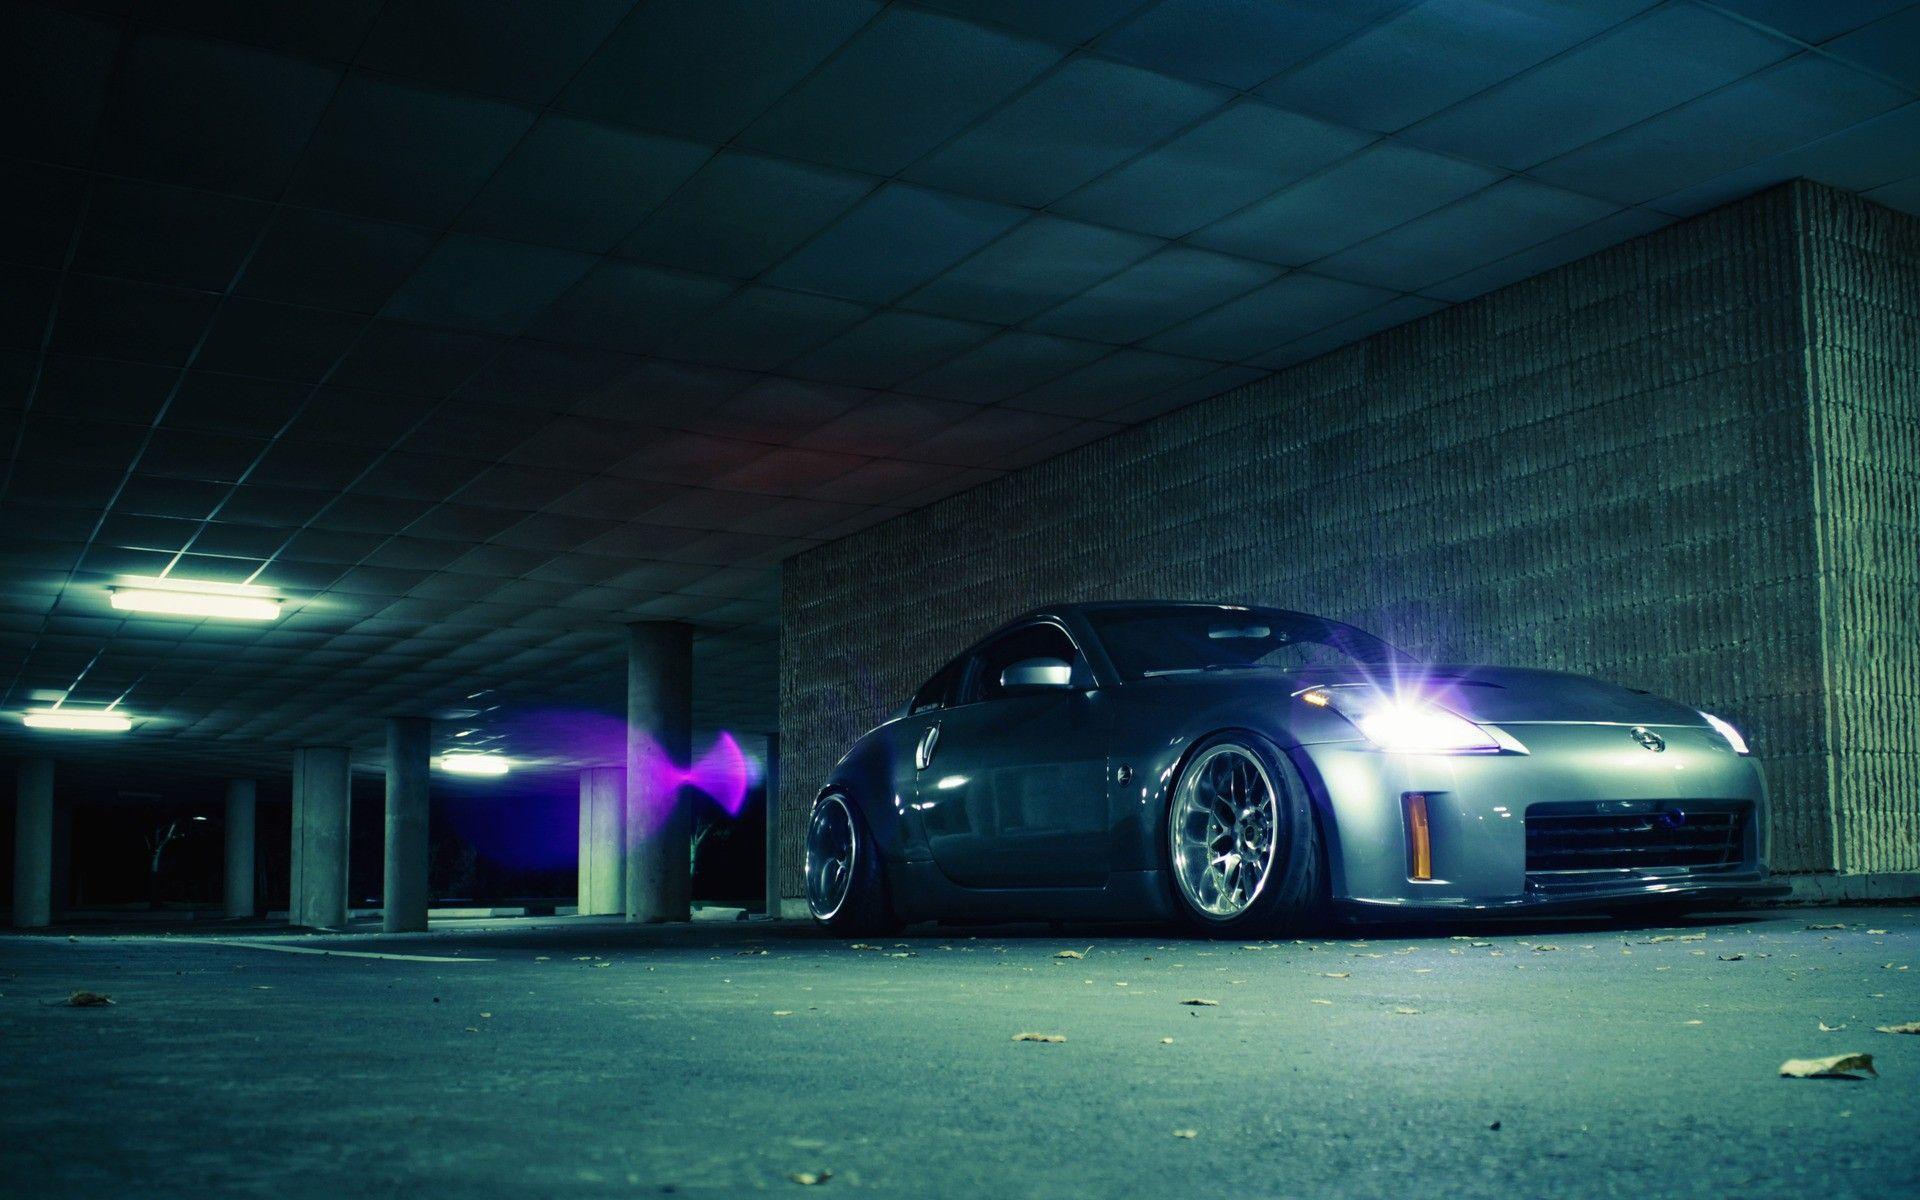 Nissan 350z Wallpapers Top Free Nissan 350z Backgrounds Images, Photos, Reviews